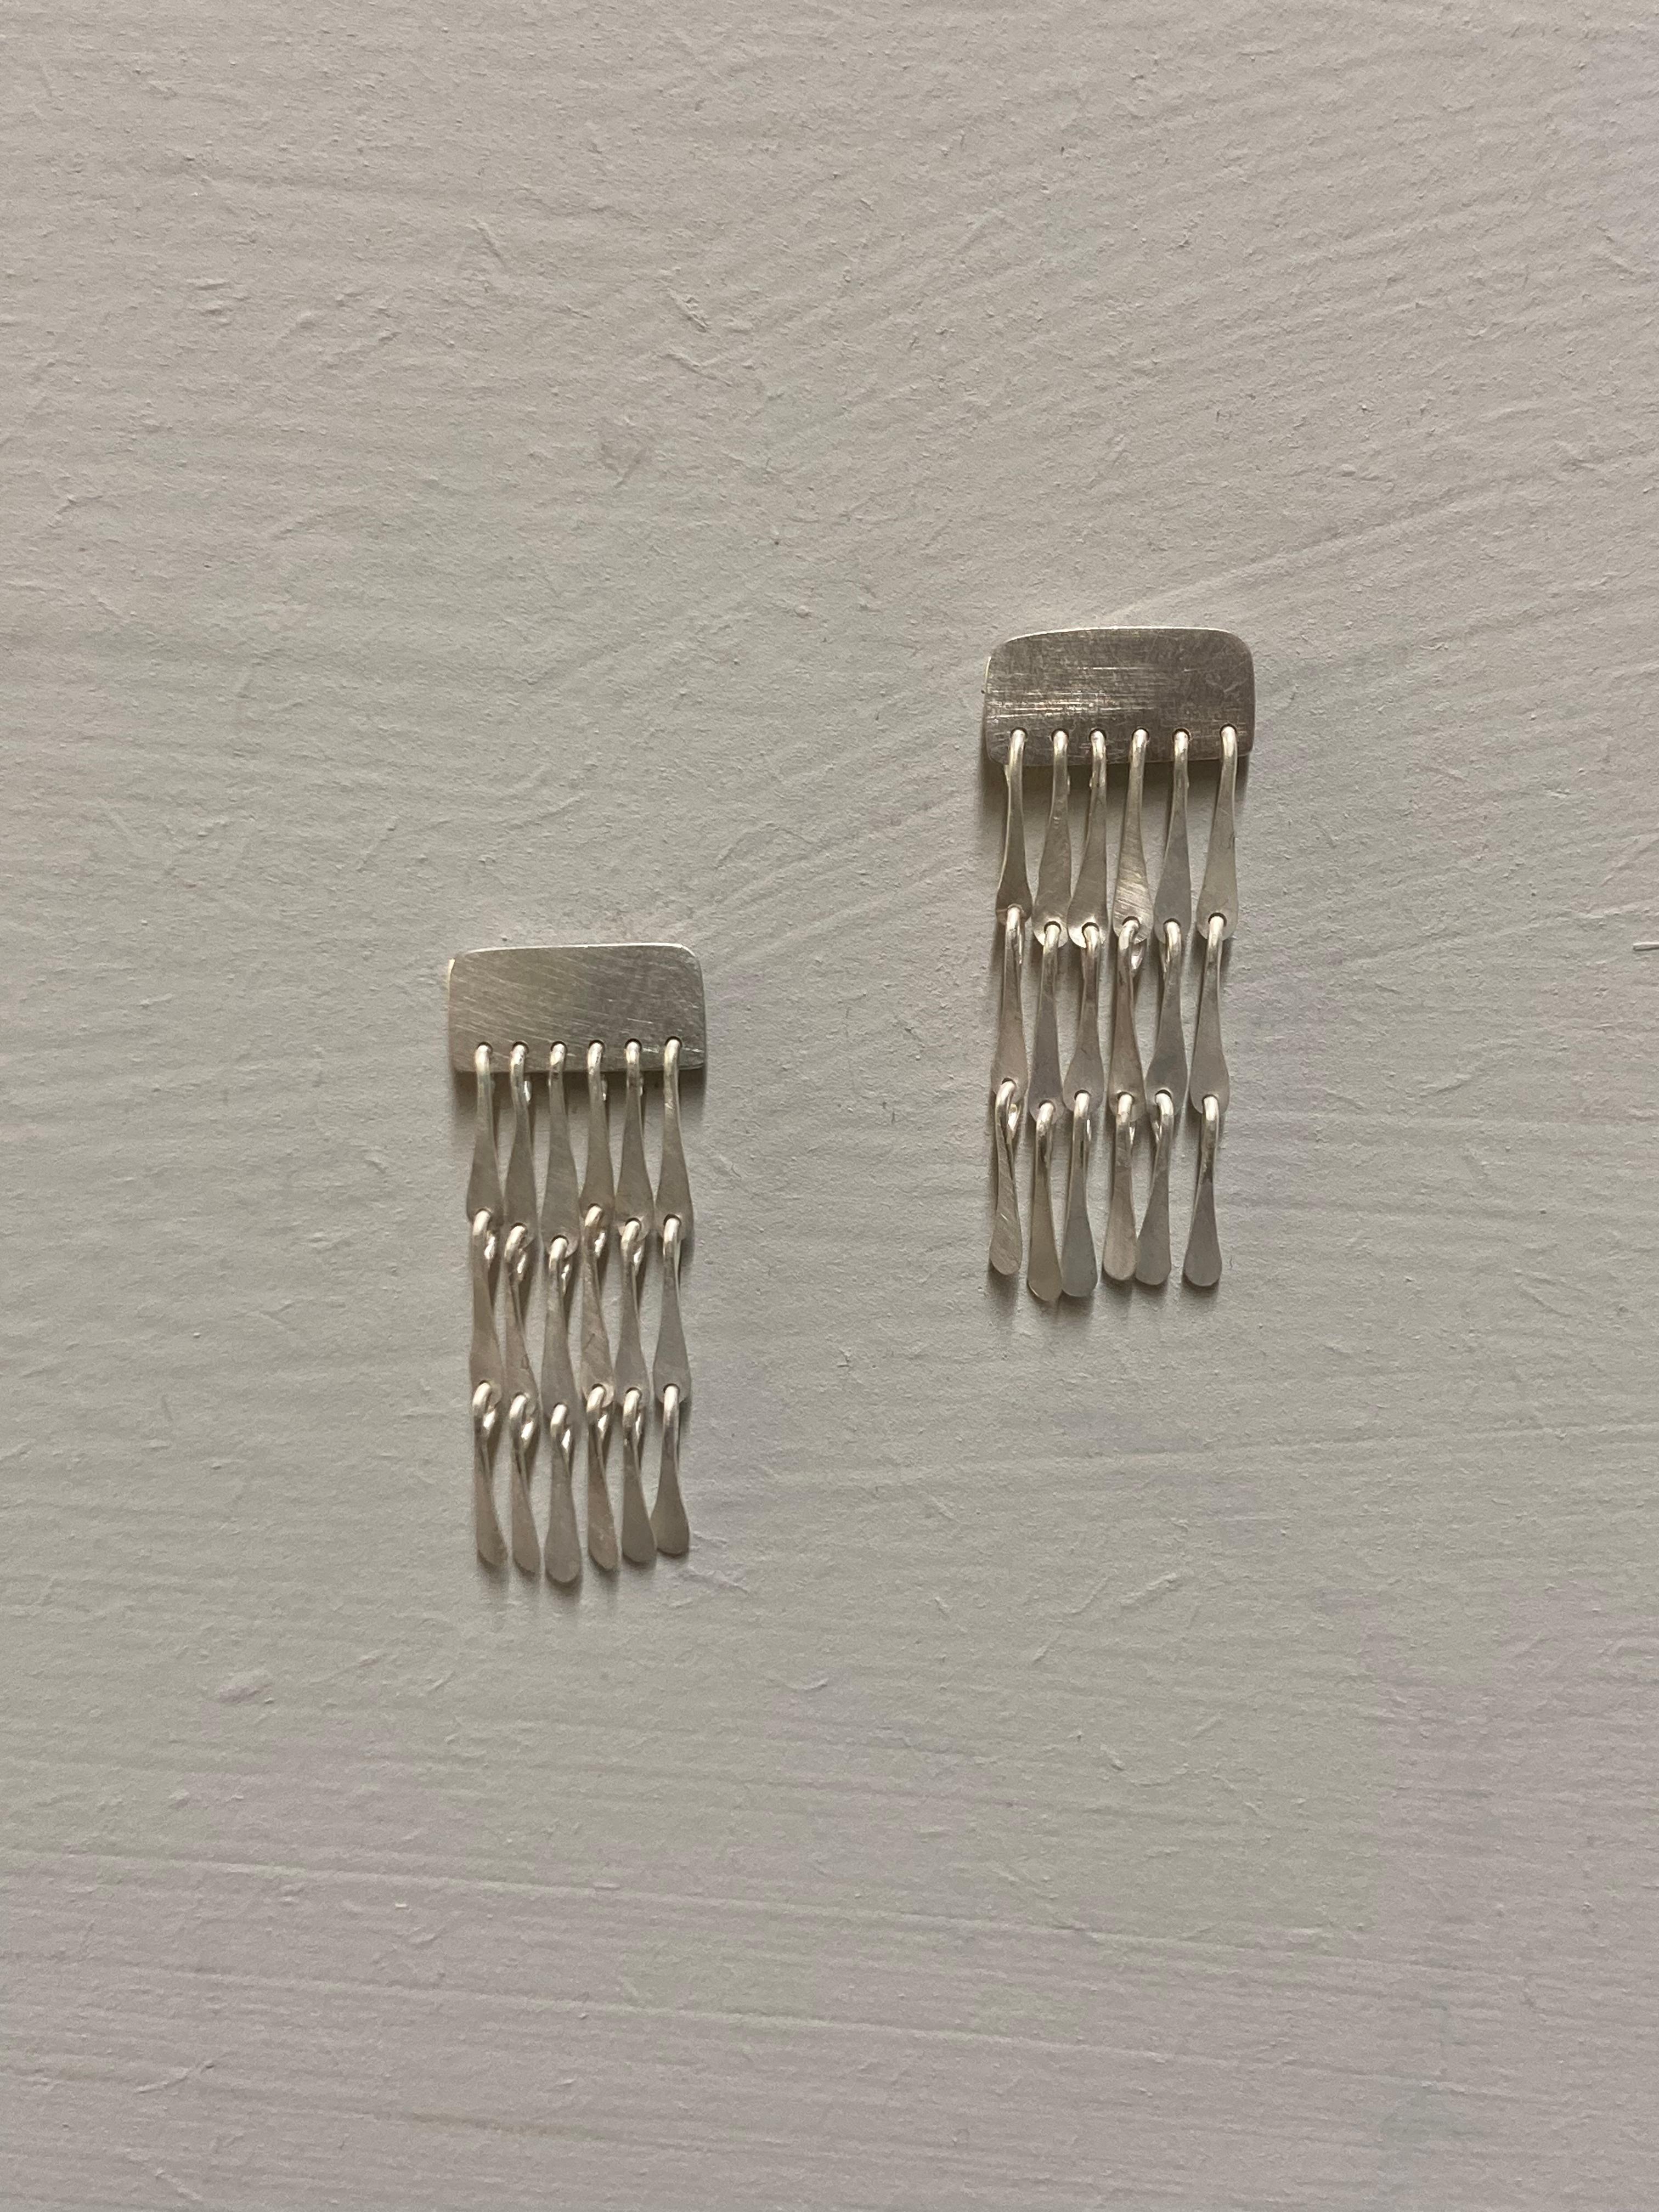 These lightweight earrings are a perfect everyday statement. Flowy delicate strands hang from these stud earrings, that are finished with a matte sheen to catch the light when worn. 

All items purchased on this shop are made to order especially for